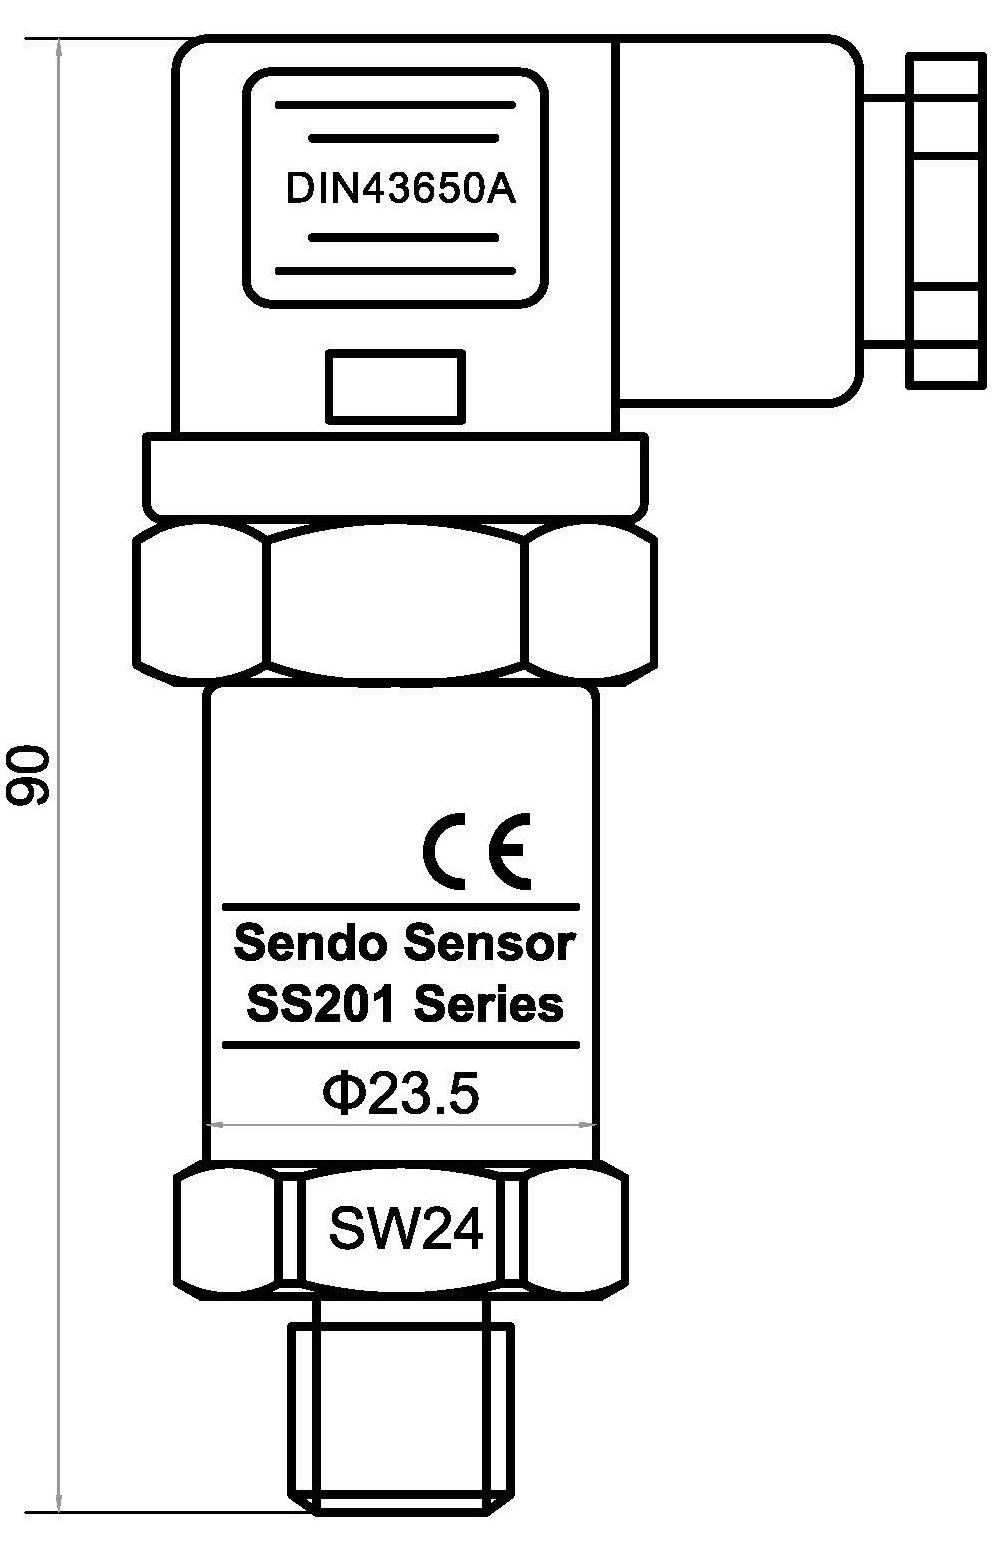 SS201 series 4-20mA low cost pressure transmitter